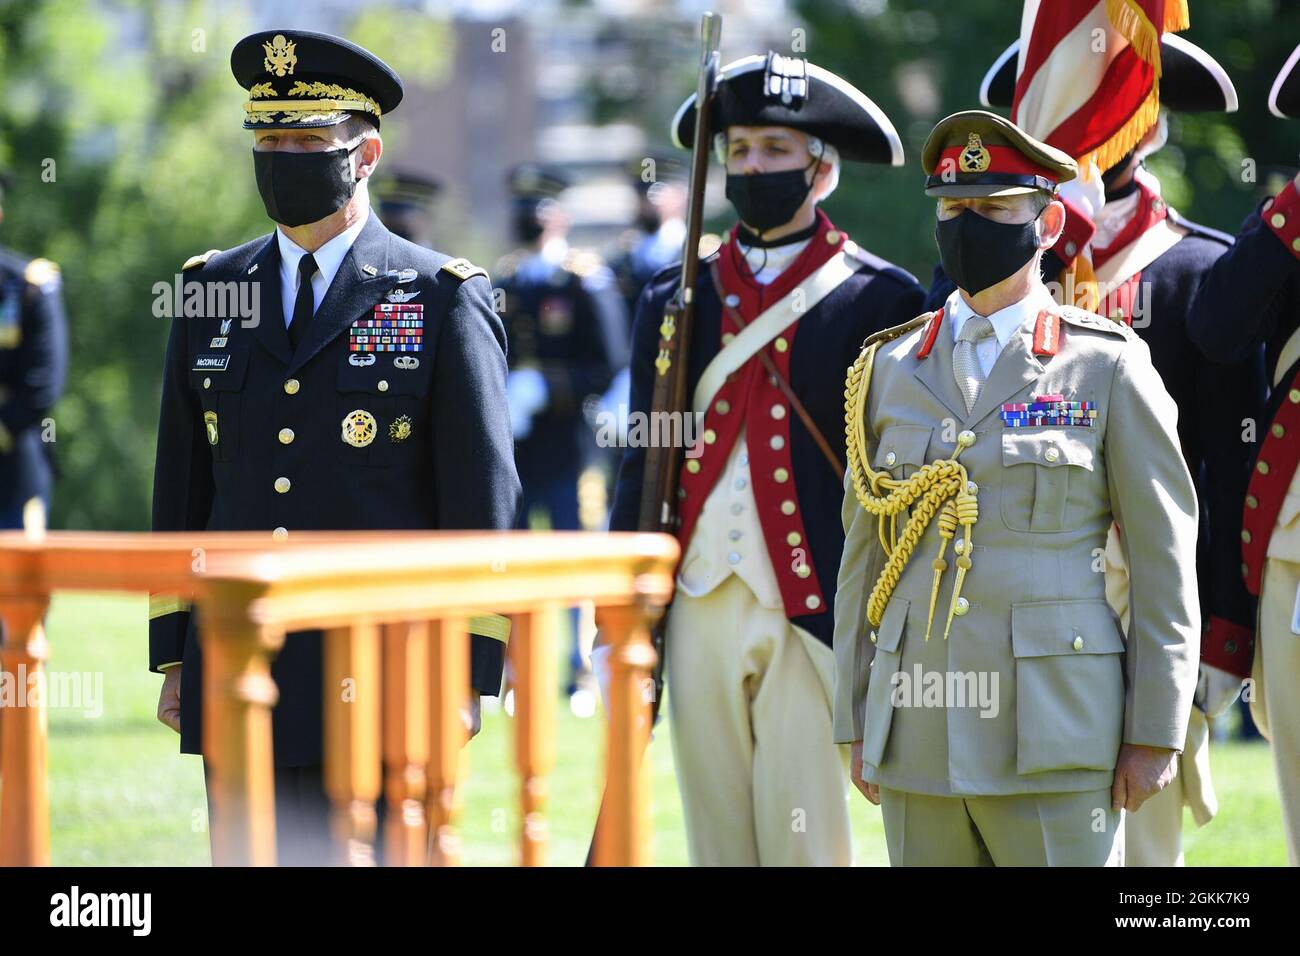 Chief of Staff of the U.S. Army Gen. James C. McConville and General Sir Mark Alexander Carleton-Smith, the chief of the General Staff of the British Army, participate in an Army Full Honor Arrival Ceremony at Whipple Field, Joint Base Myer-Henderson Hall, Arlington, Va., May 13, 2021. Stock Photo